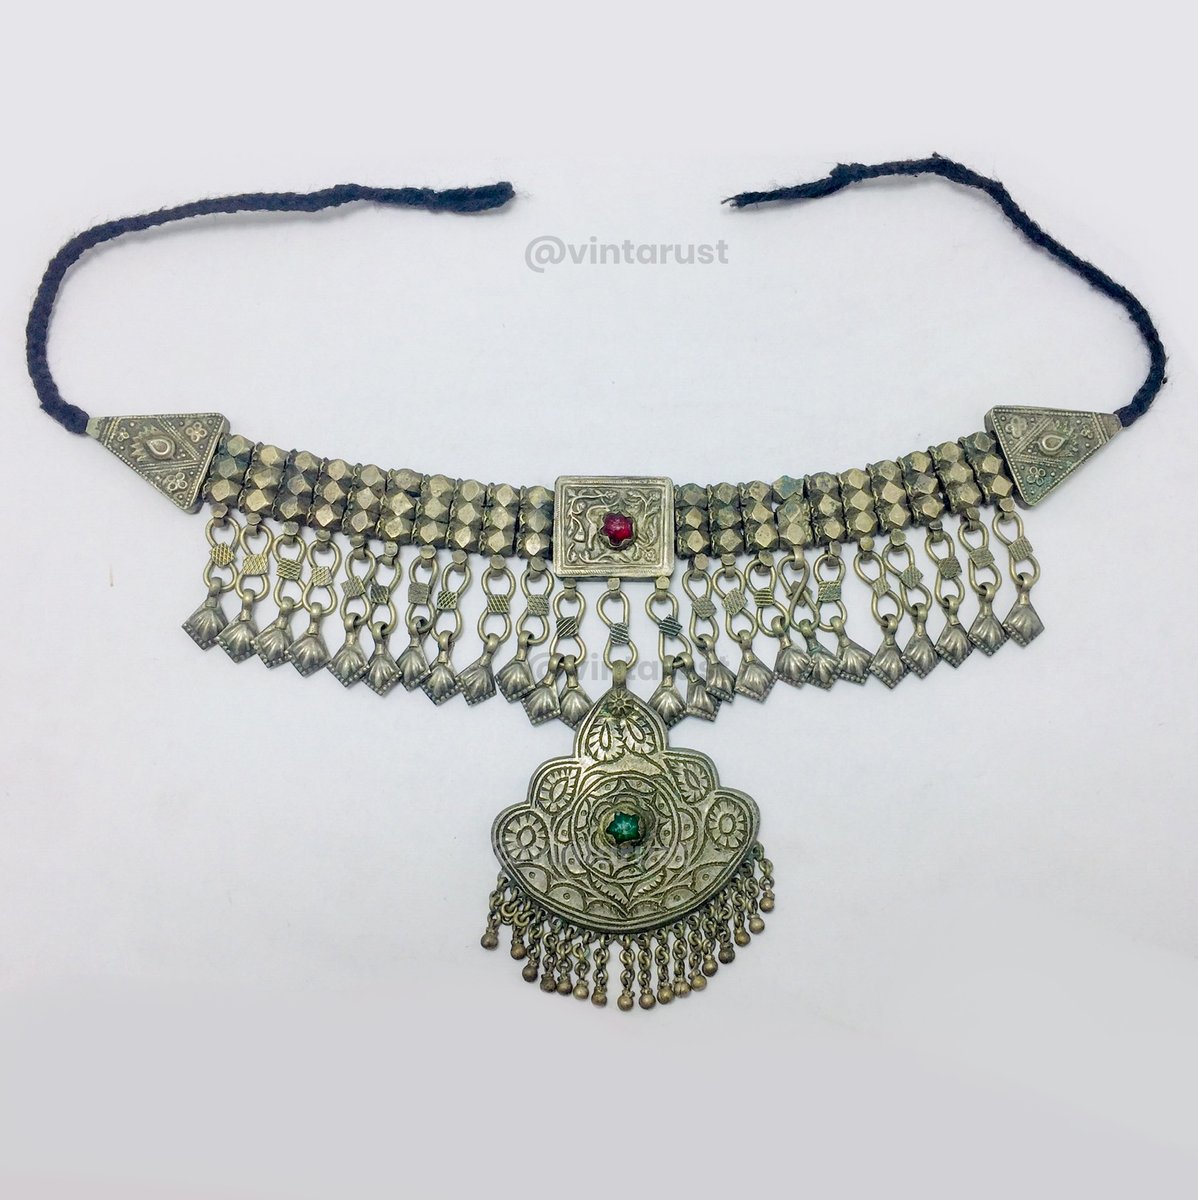 Bohemian Multilayers Beaded Chain Necklace.

Upto 20% OFF
Sale Price: $96.00

Shop Now:
buff.ly/3OztGSC

#choker #chokernecklace #chokernecklaces #beadedjewelryofinstagram #beadedjewelry #victorianjewelry #victorianjewellery #antiquejewelry #antiquejewellery #bestofetsy